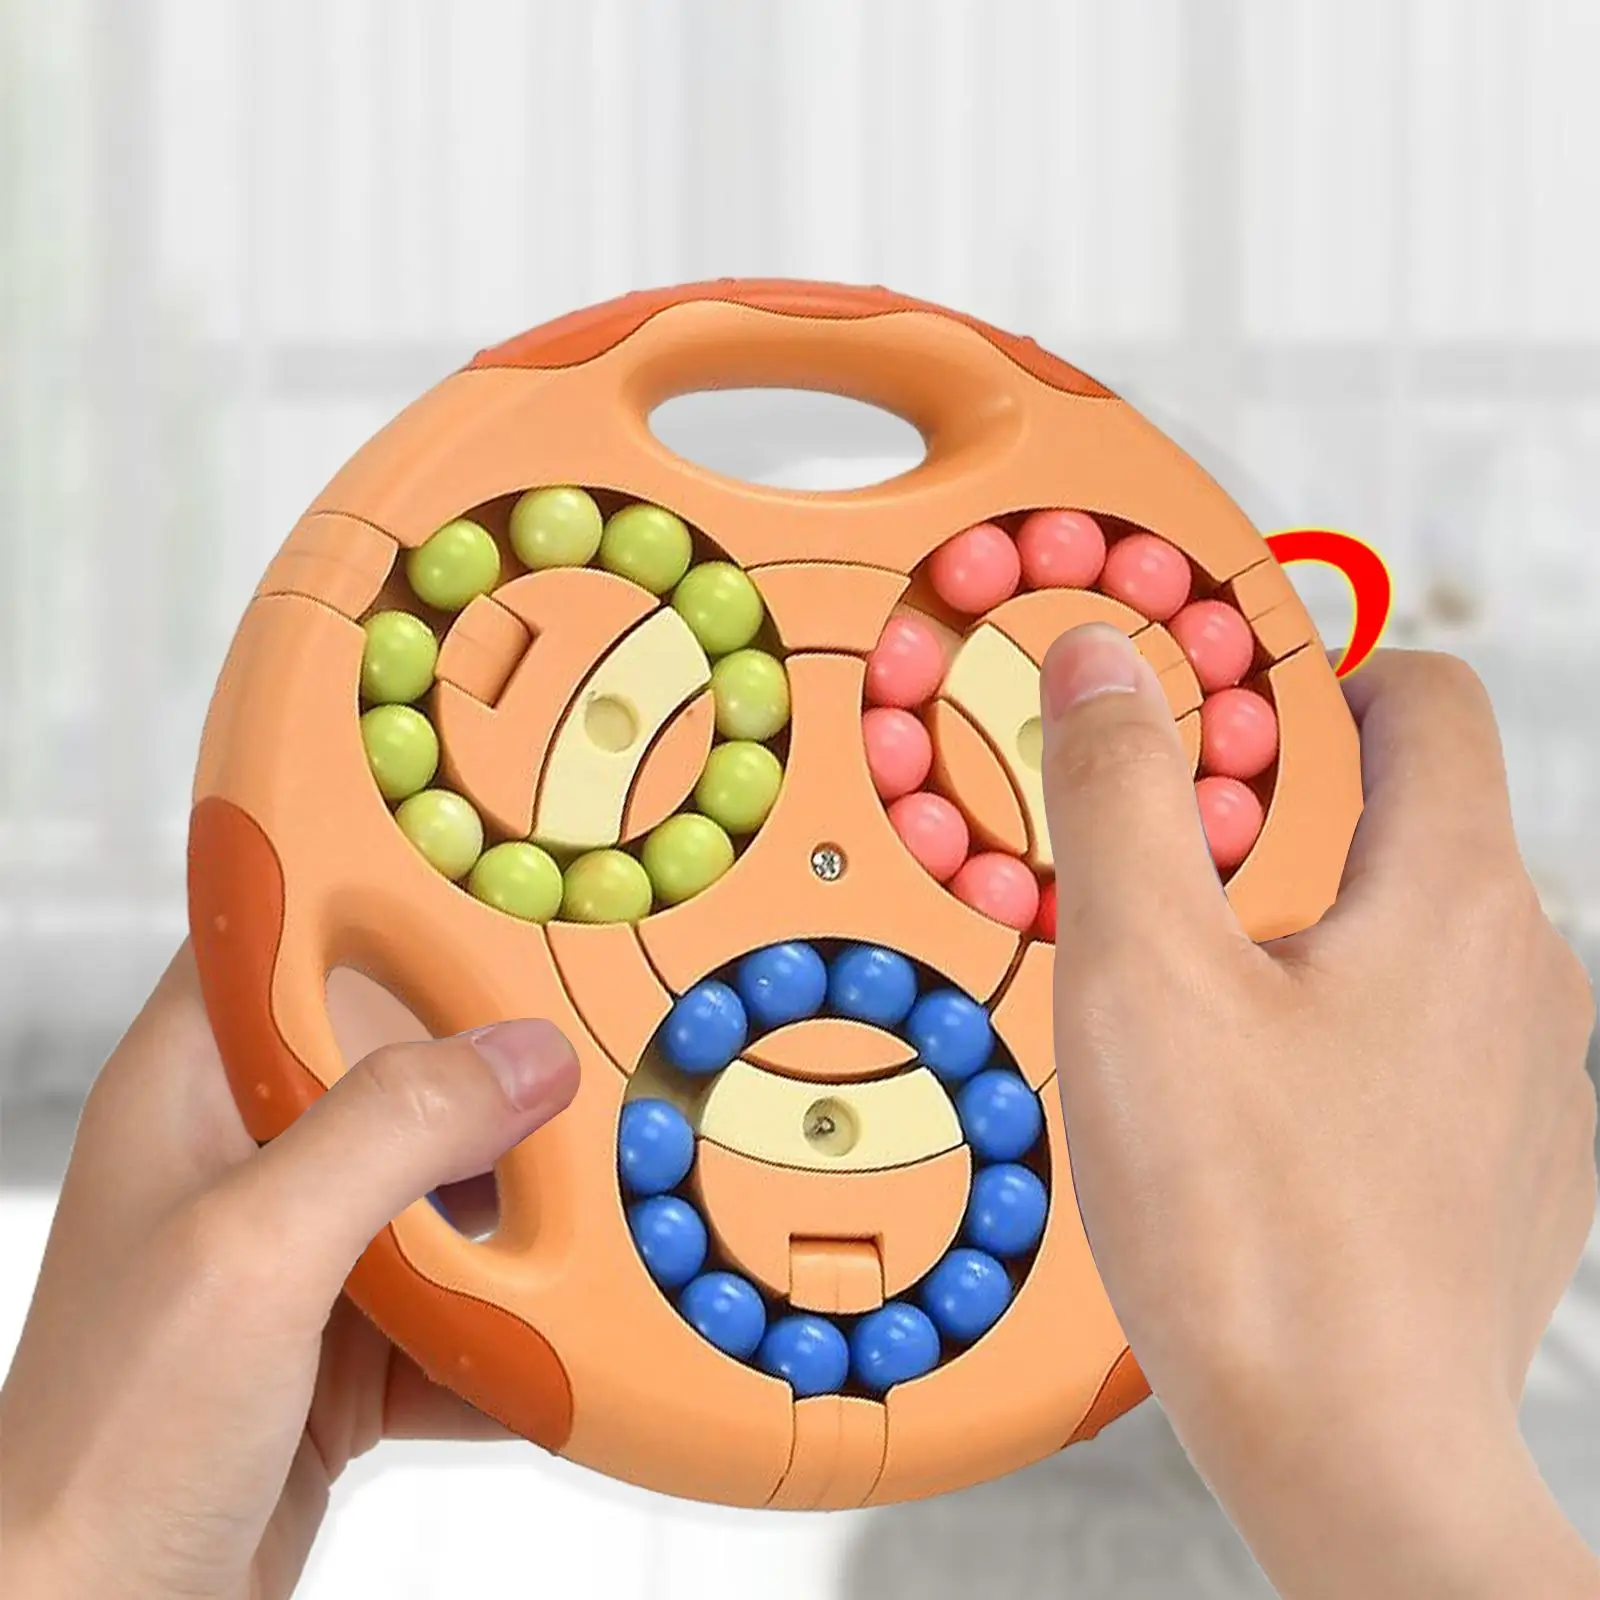 Rotating Magical Beans Fingertip Toys Adults Children Finger Gyro Magical Disk Educational Intelligence Game Puzzles Toy